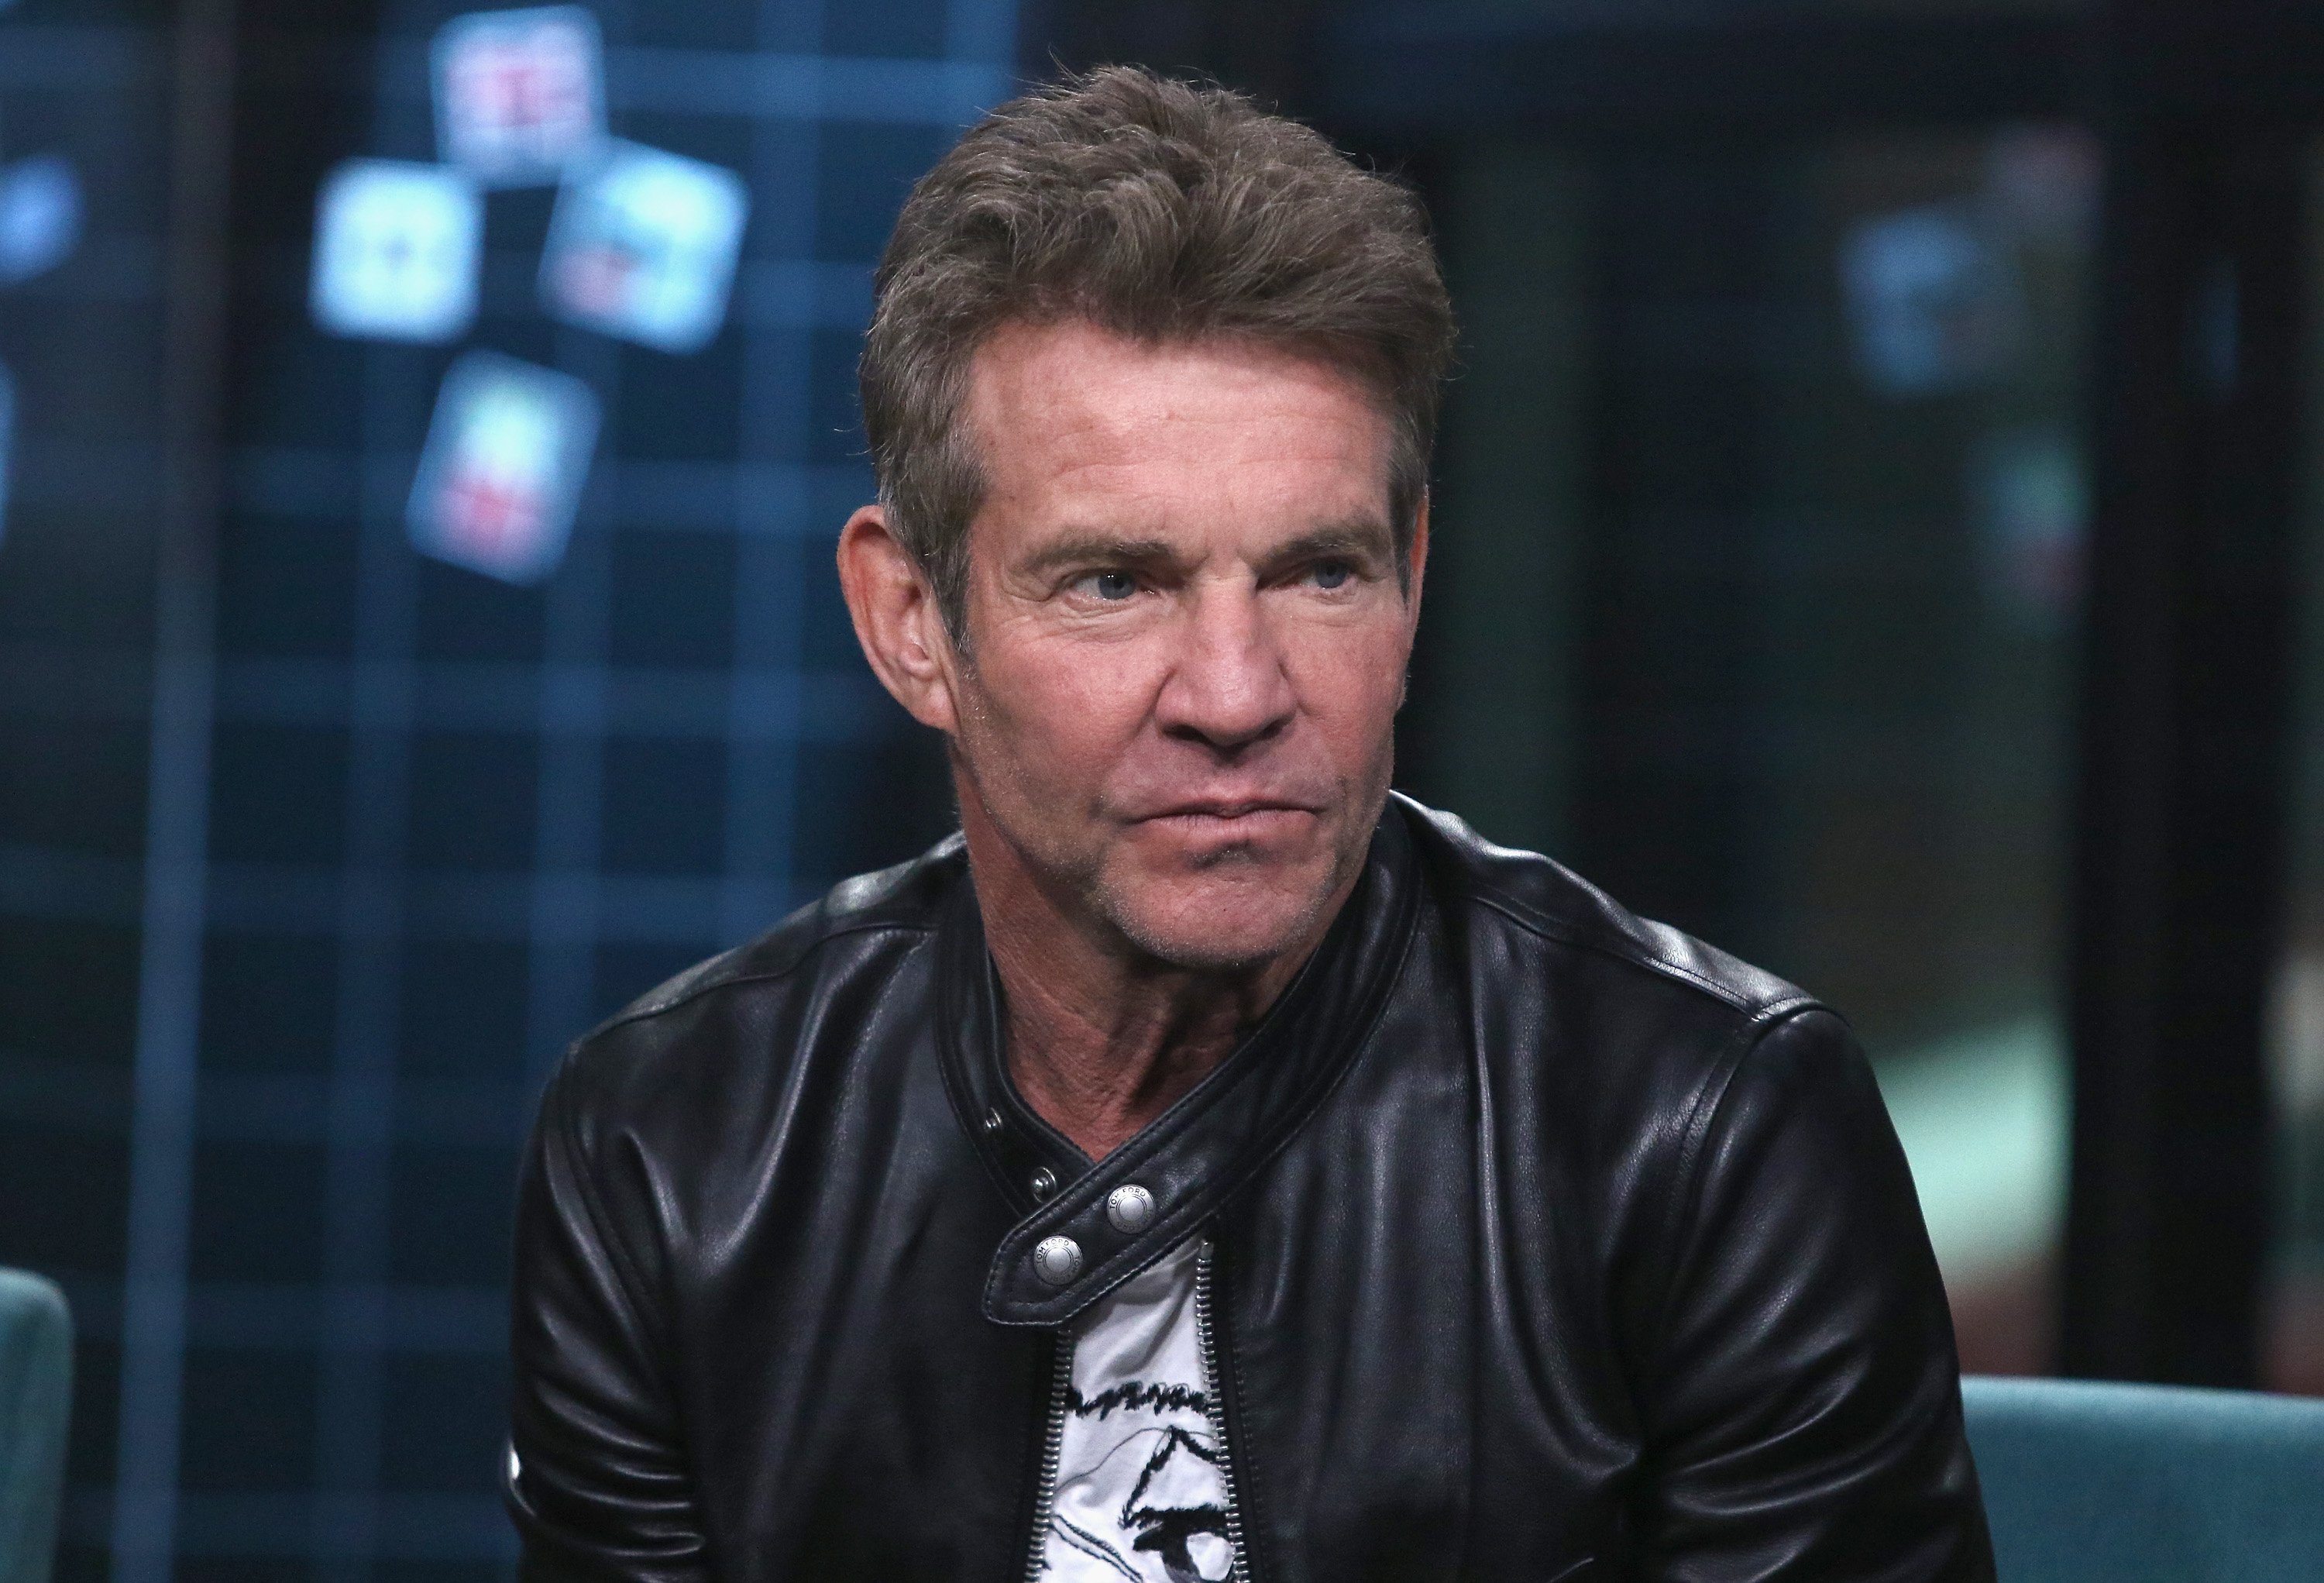  Dennis Quaid attends the Build Series to discuss "Out of the Box" at Build Studio on November 30, 2018 in New York City. | Source: Getty Images